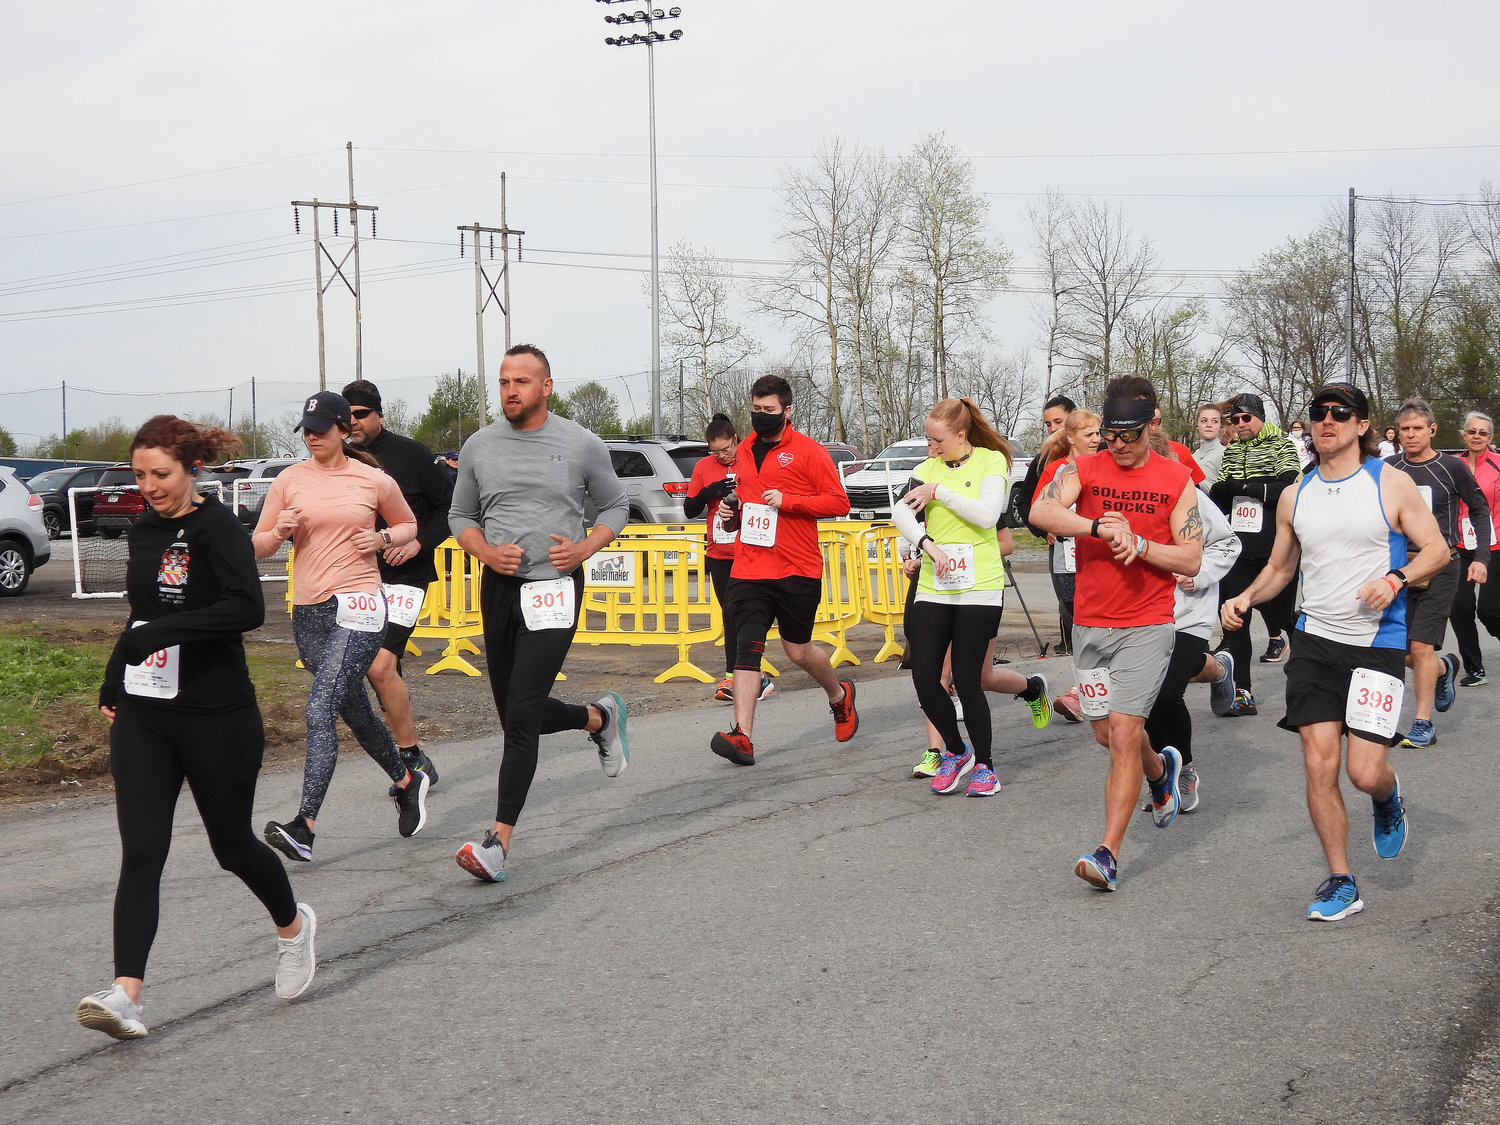 Runners take off for America's Greatest Heart Run and Walk on Satuday, May 7 from Accelerate Sports, running the 5k to raise awareness and support for heart health